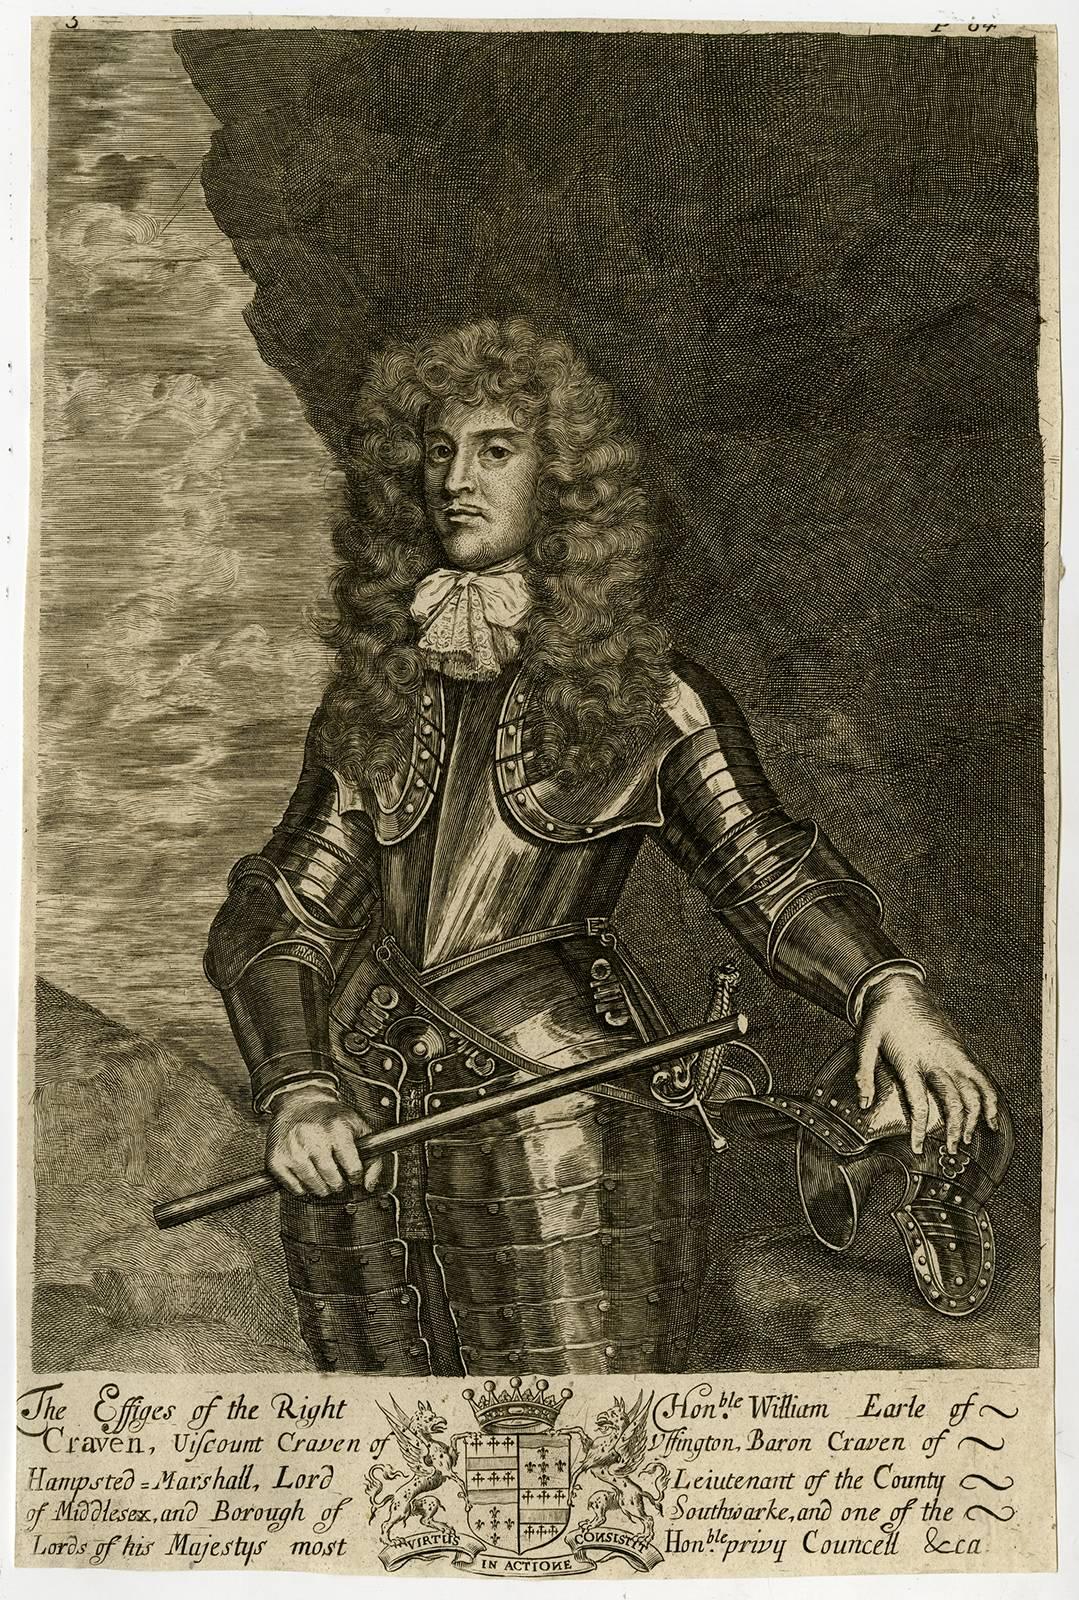 Unknown Portrait Print - Untitled - Collection of six portraits from "A display of heraldry."